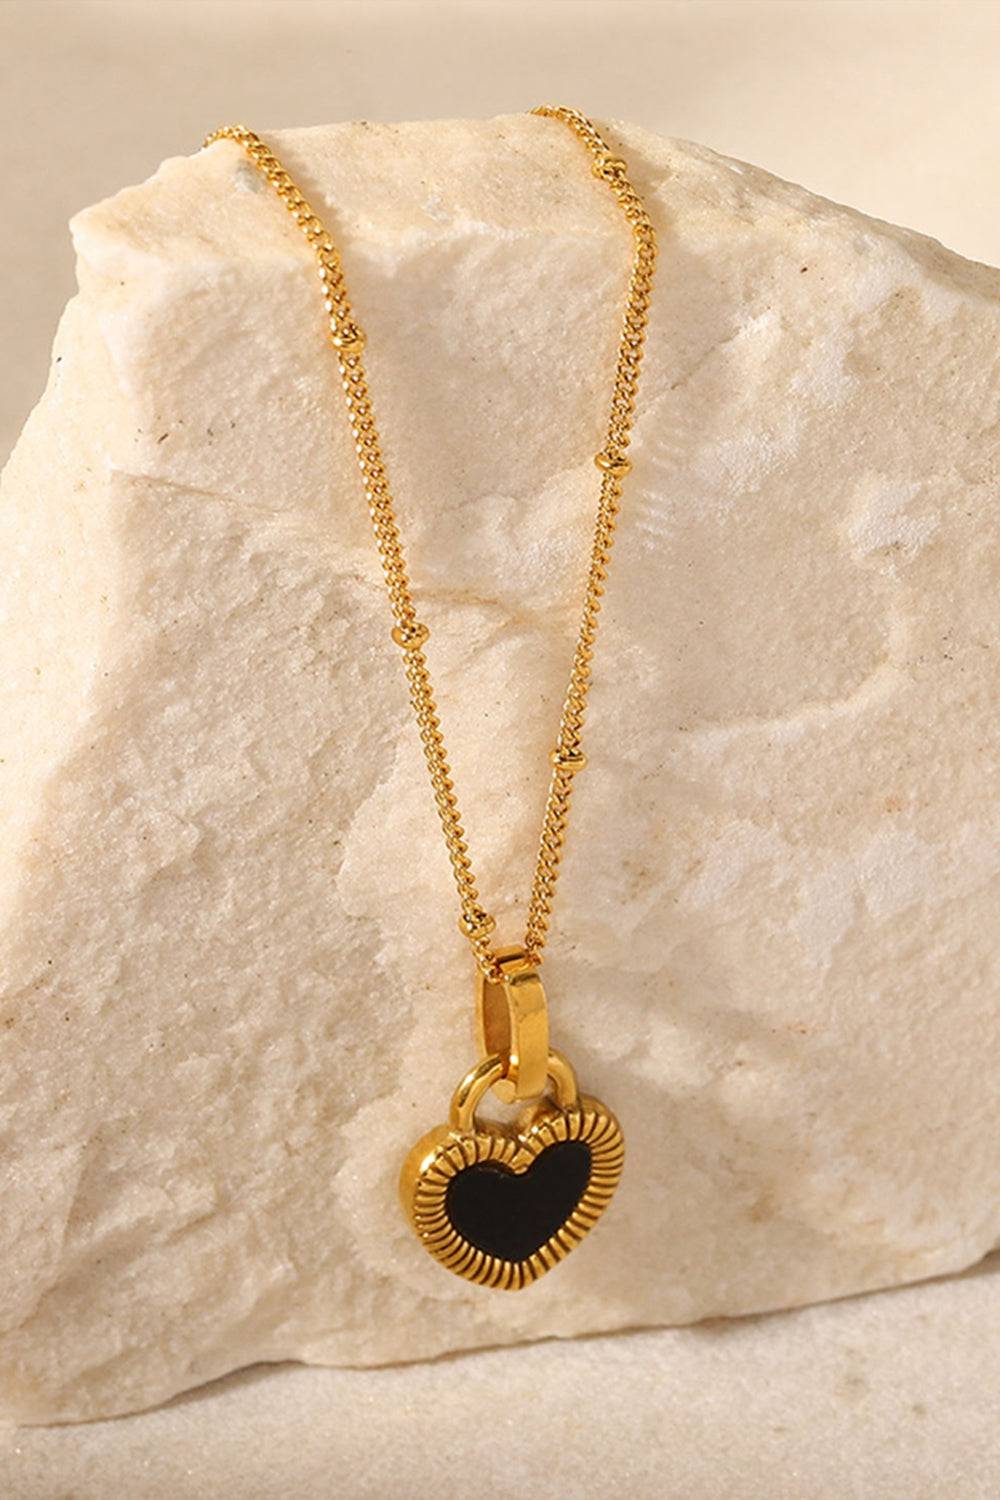 Heart's Delight - Let love shine through you with our Contrast Heart Pendant Necklace - Express your deepest feelings in a timeless way. - Guy Christopher